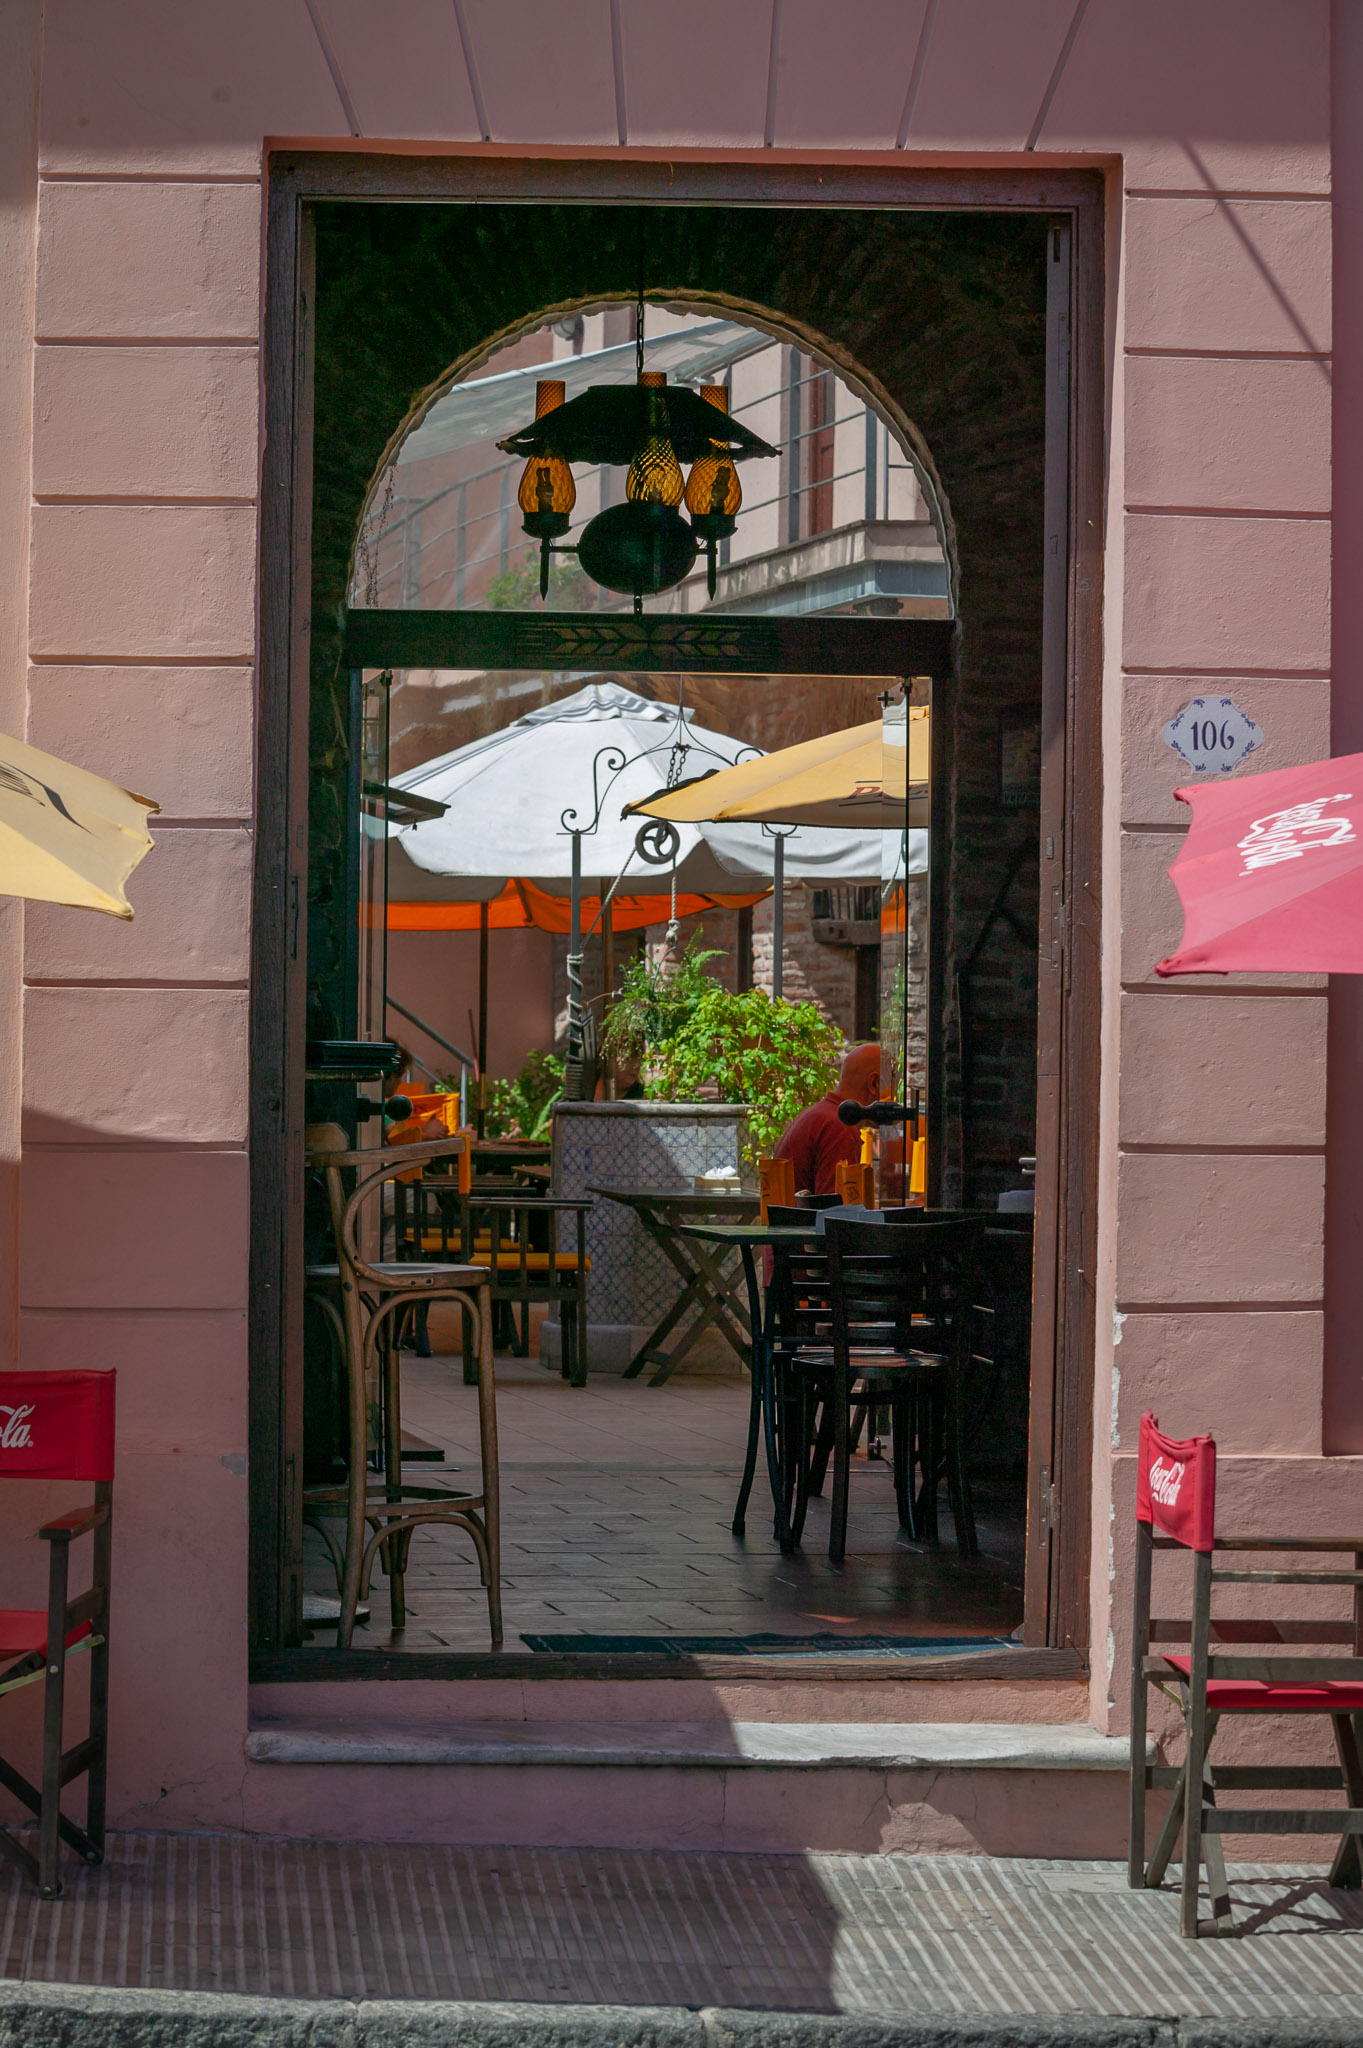 Lunch options in Colonia, Uruguay